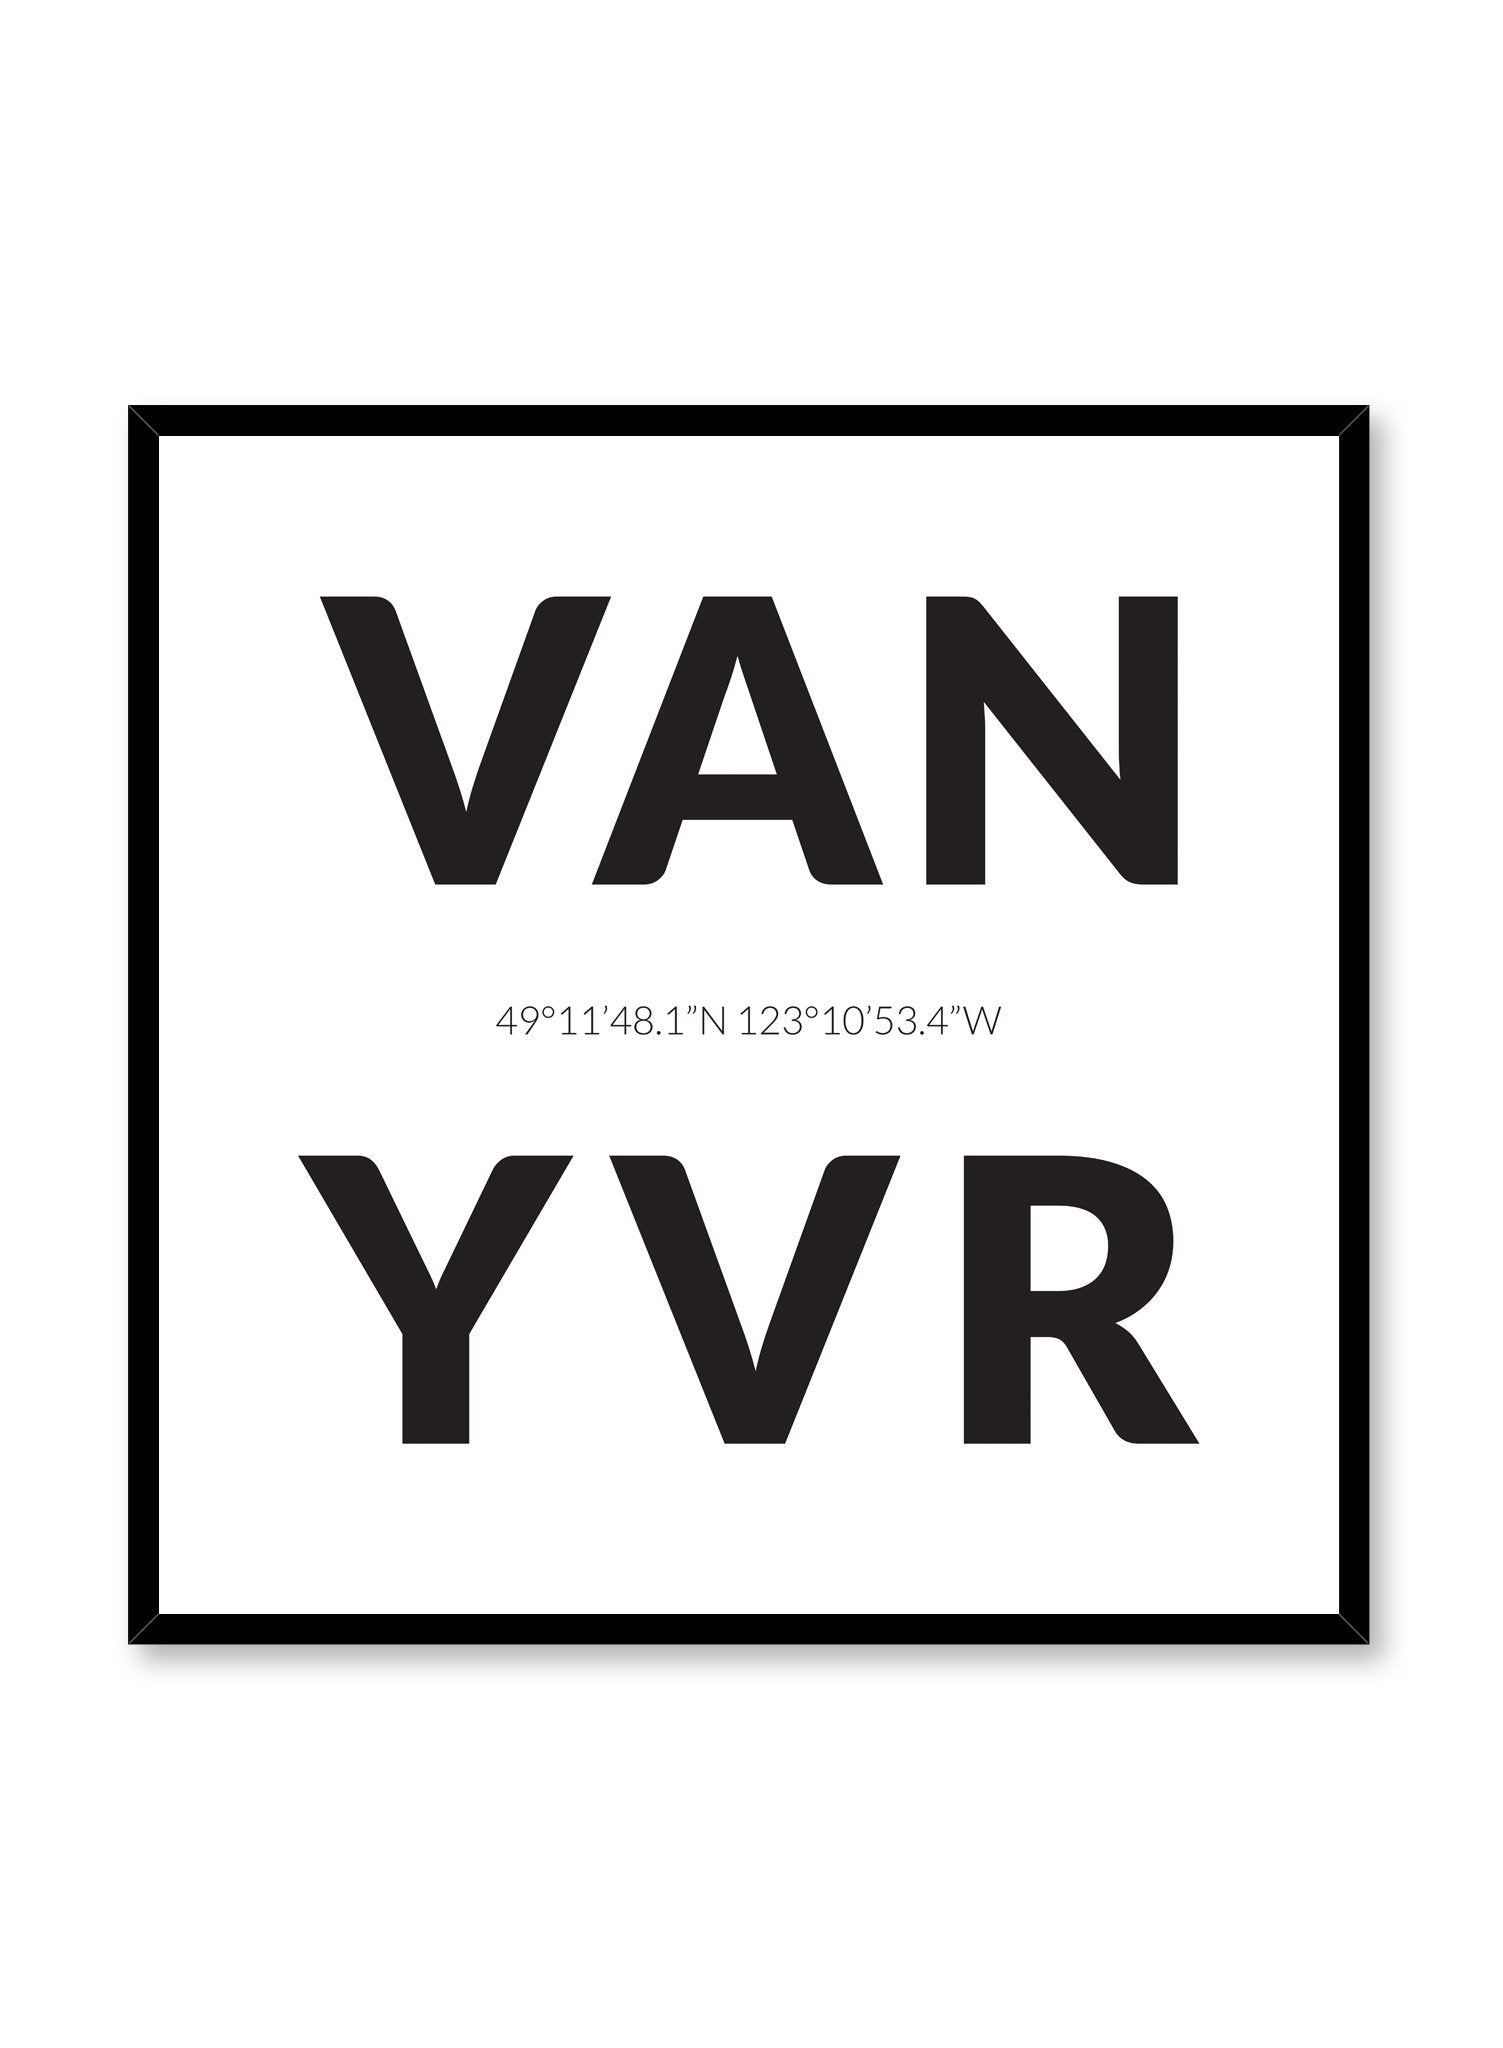 Minimalist design poster by Opposite Wall with airport code Vancouver YVR